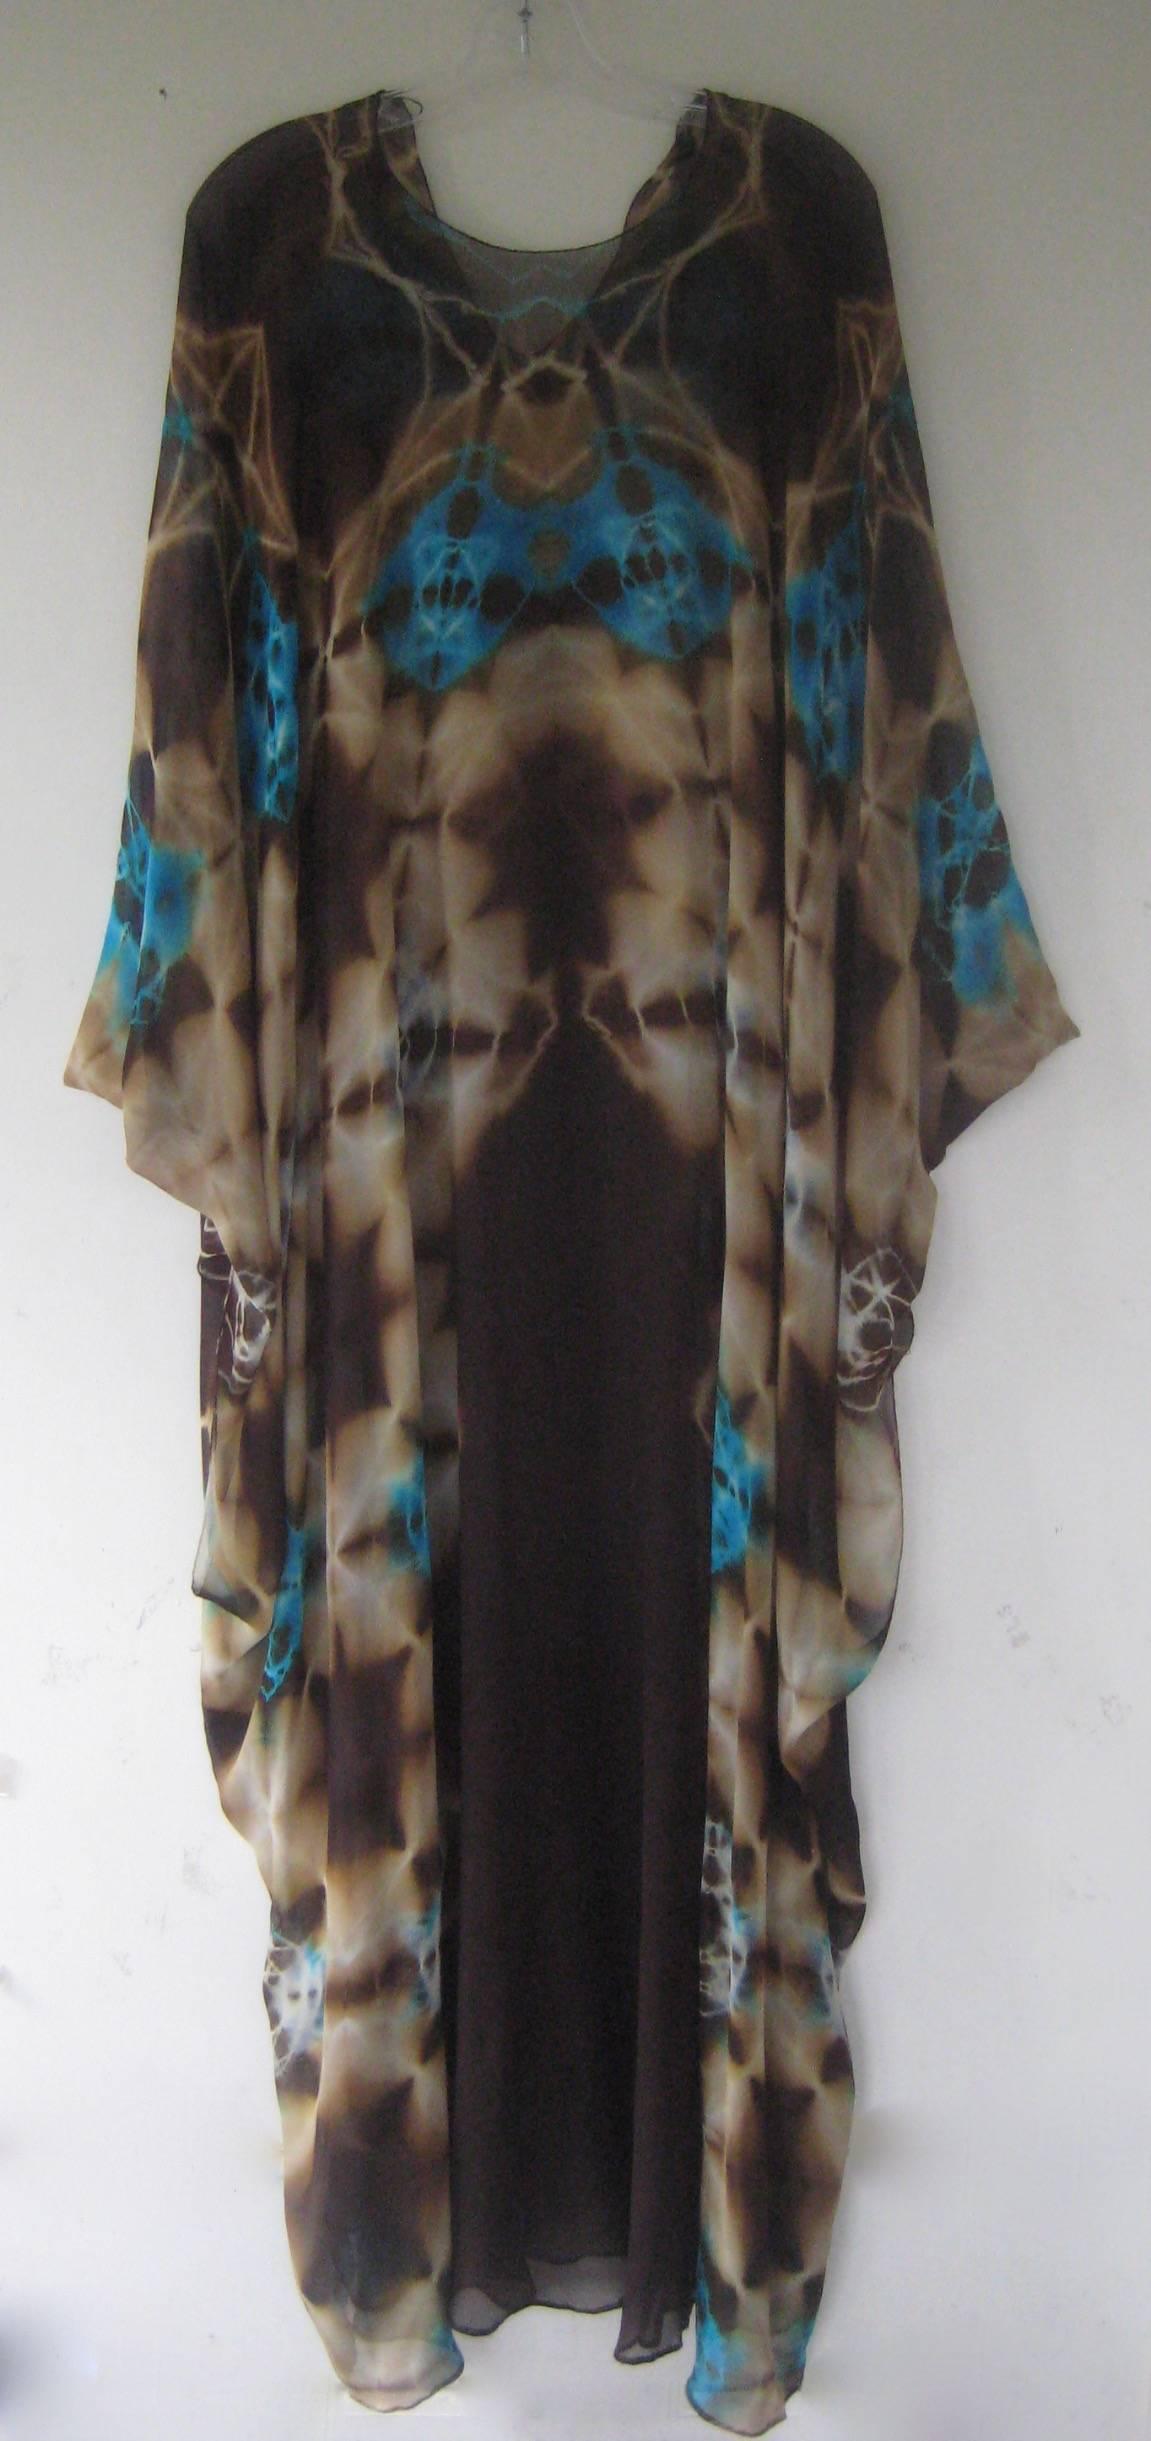 Unbelievably rare Halston piece !
1972 tie dye silk chiffon caftan 
This still has it's matching sleeveless underdress !
Gorgeous colors in blues and browns
Matching underdress is a deep brown ,Photos on the wall show the caftan without the